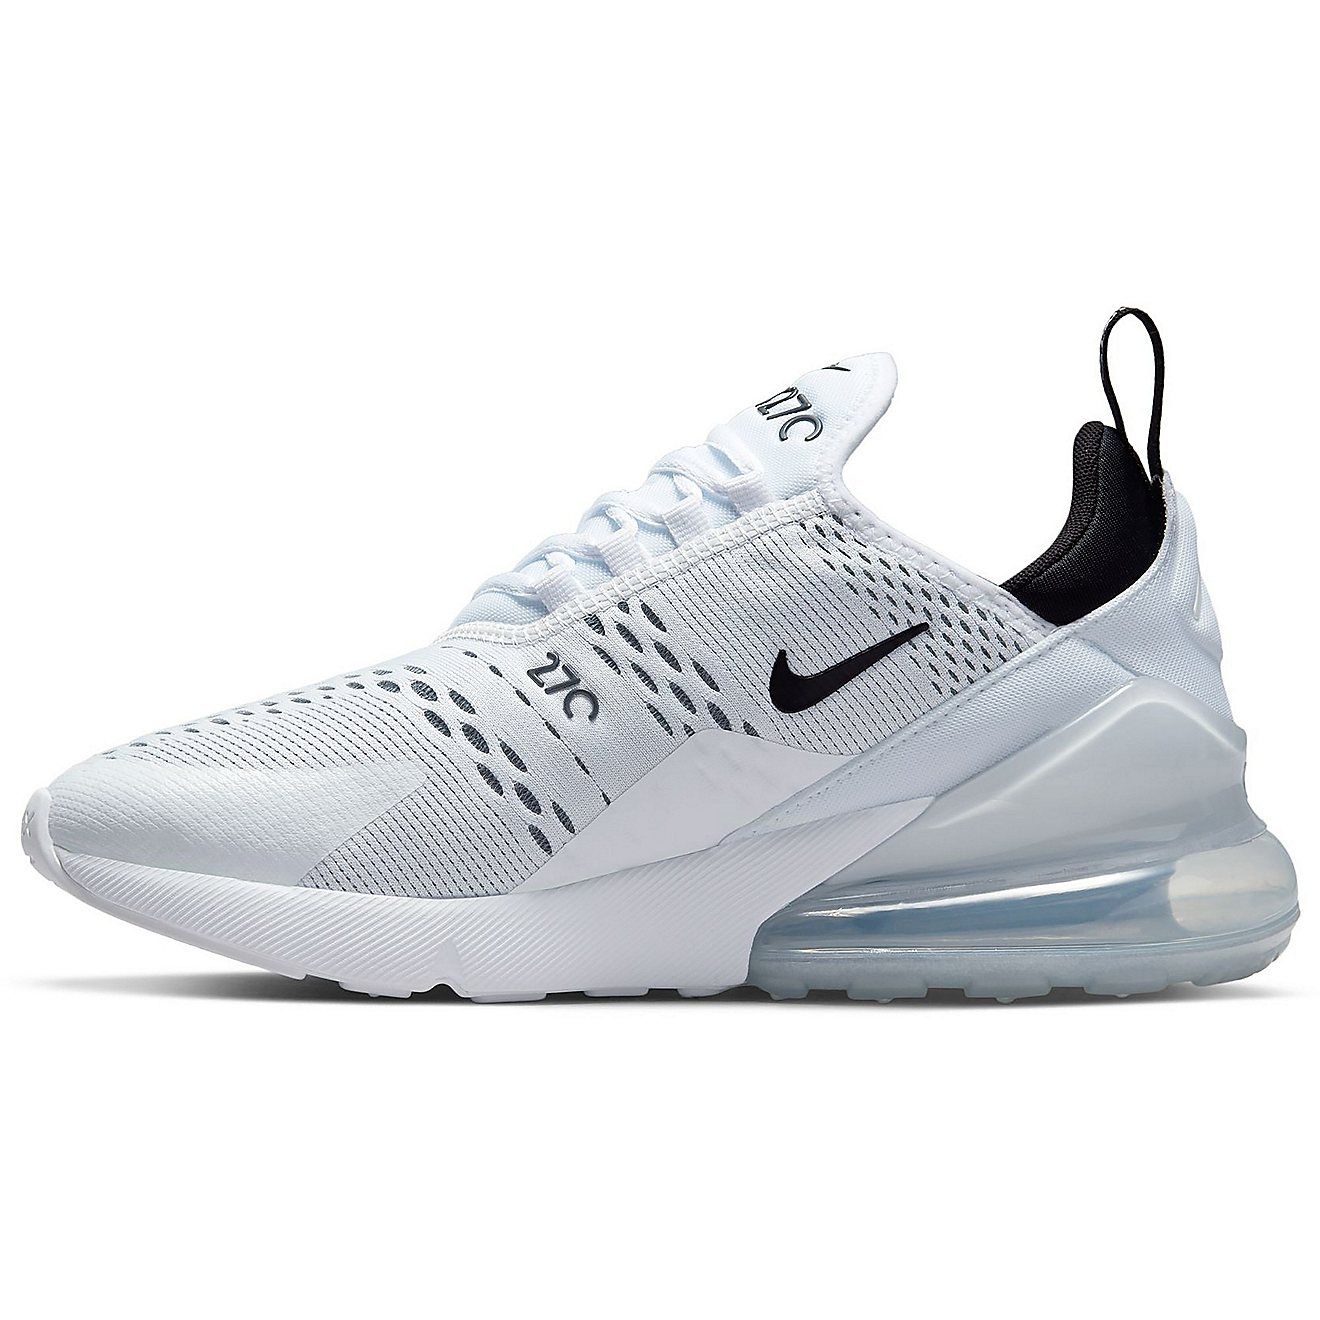 Nike Women's Air Max 270 Shoes | Free Shipping at Academy | Academy Sports + Outdoors